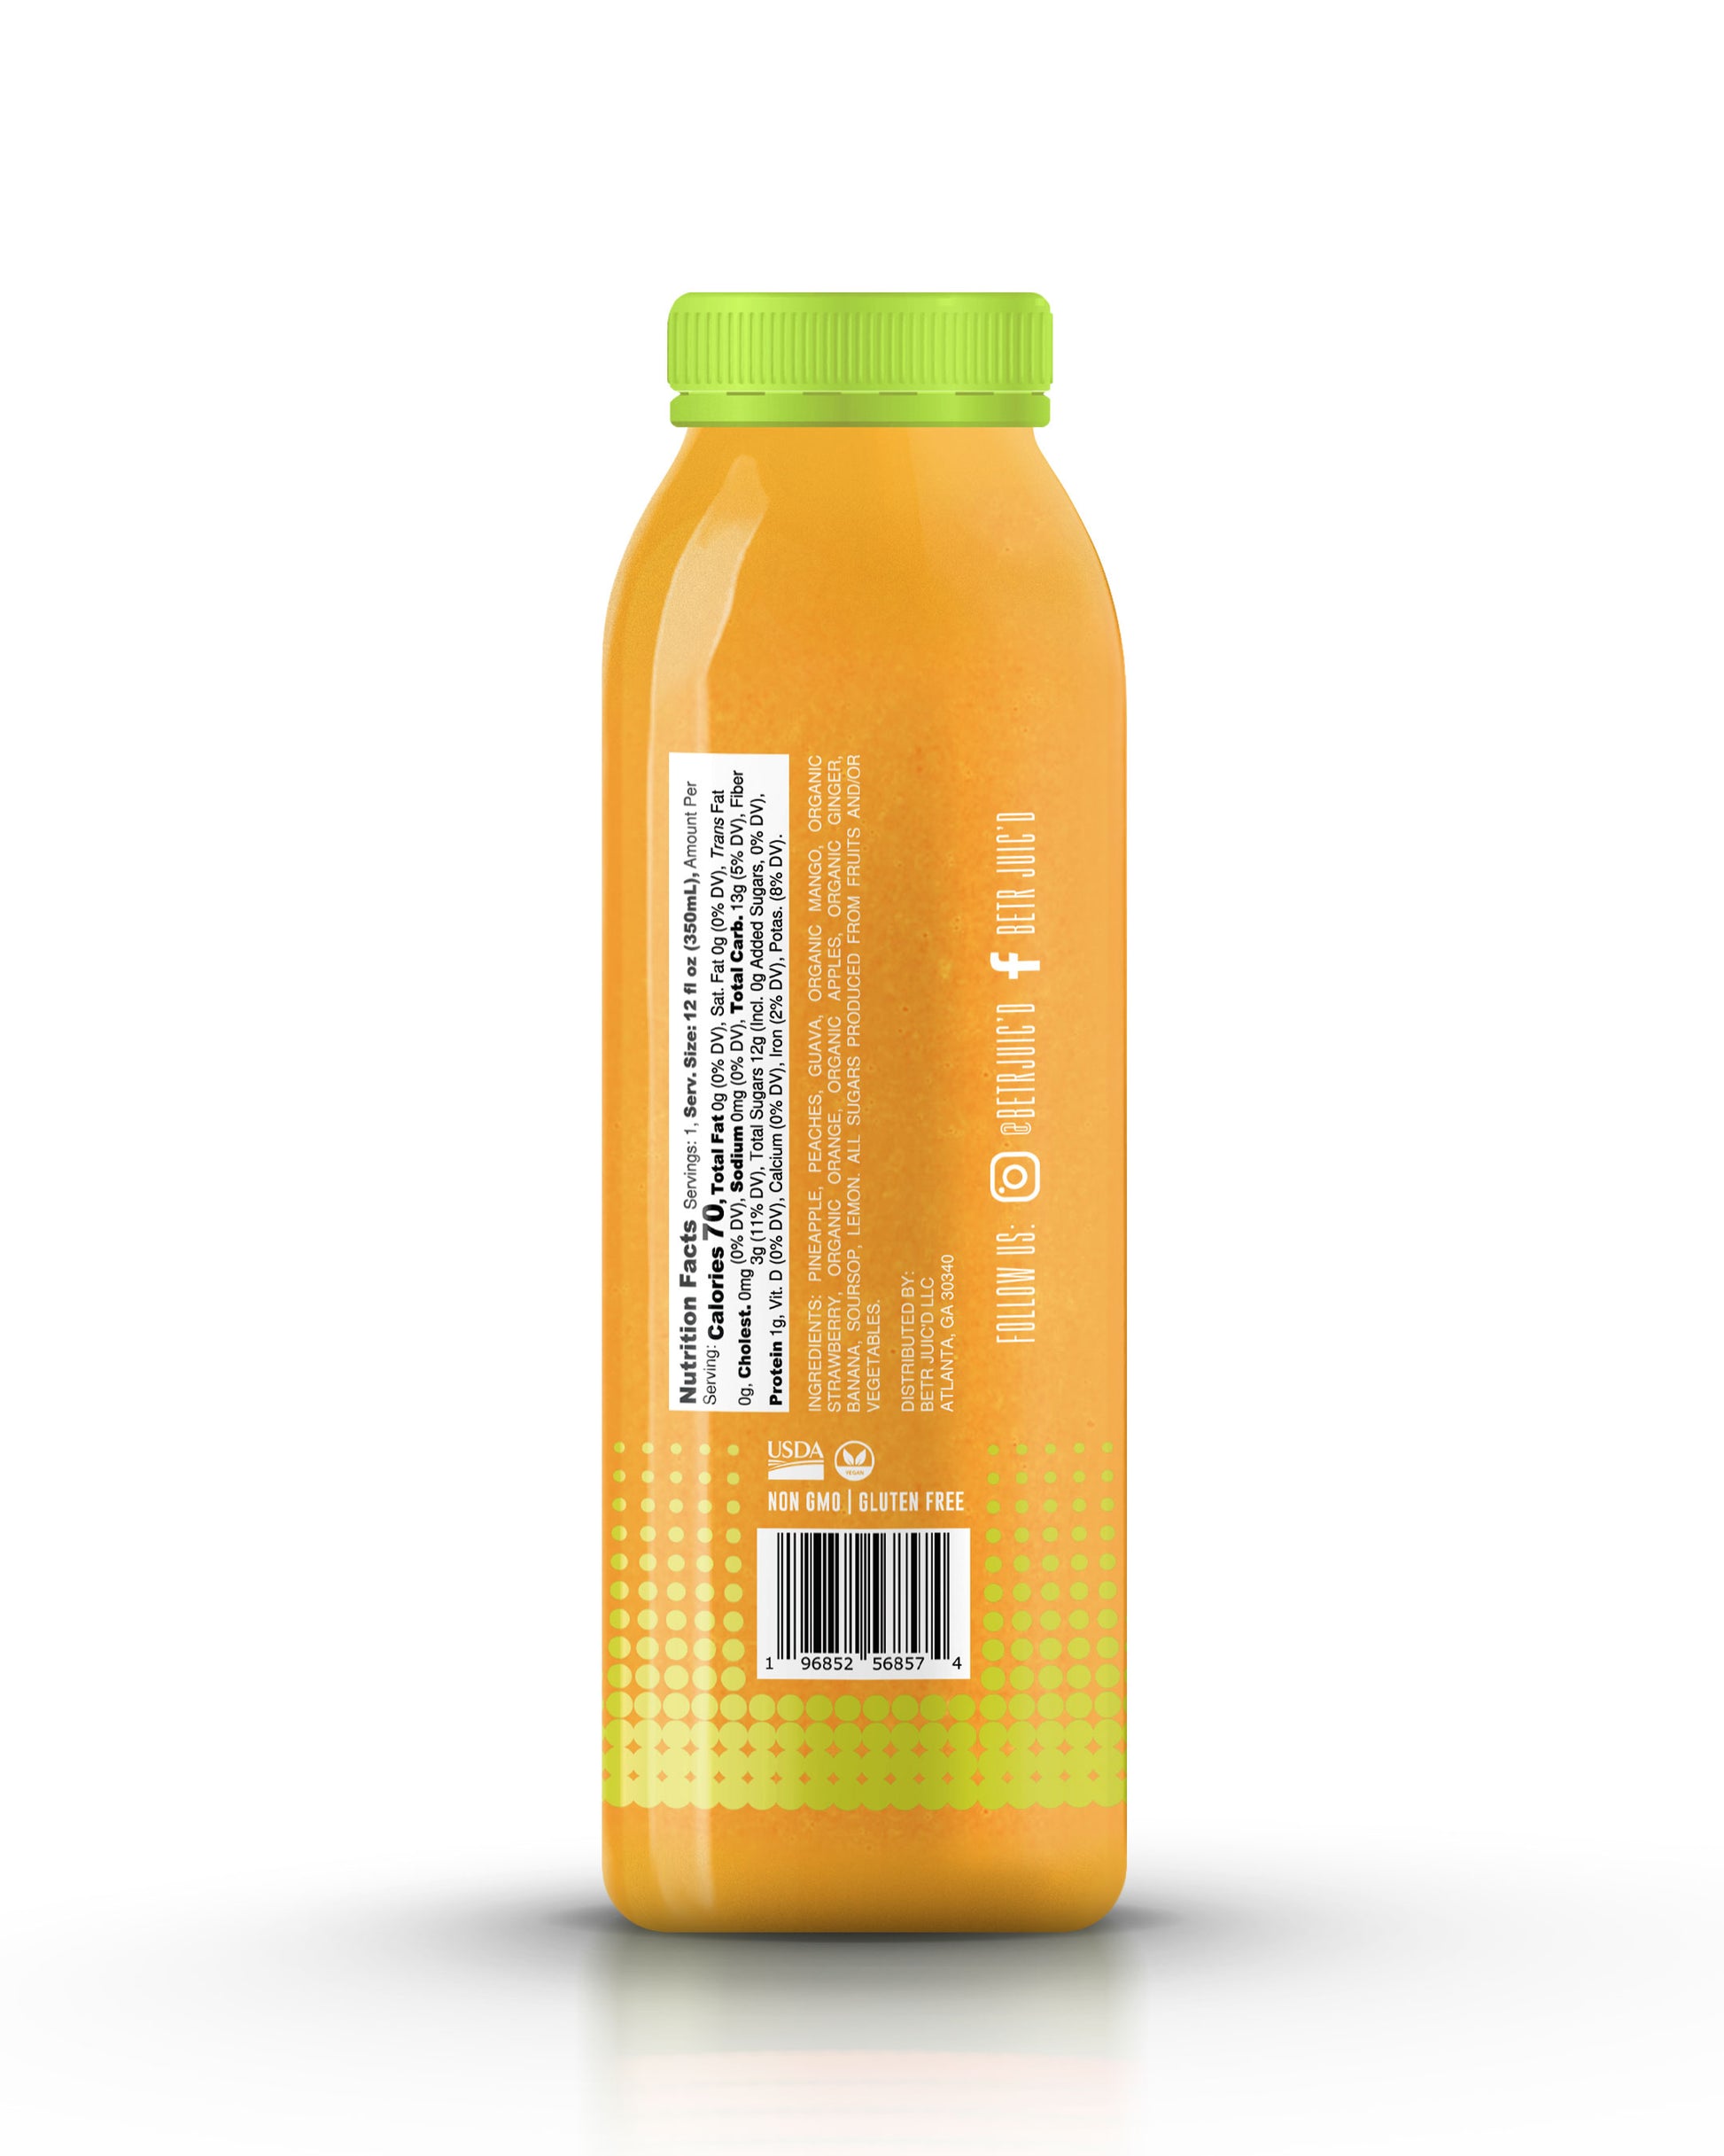 A refreshing and colorful Jamaican beverage in an orange hue, with a lime green cap and label adorned with lime green dots.